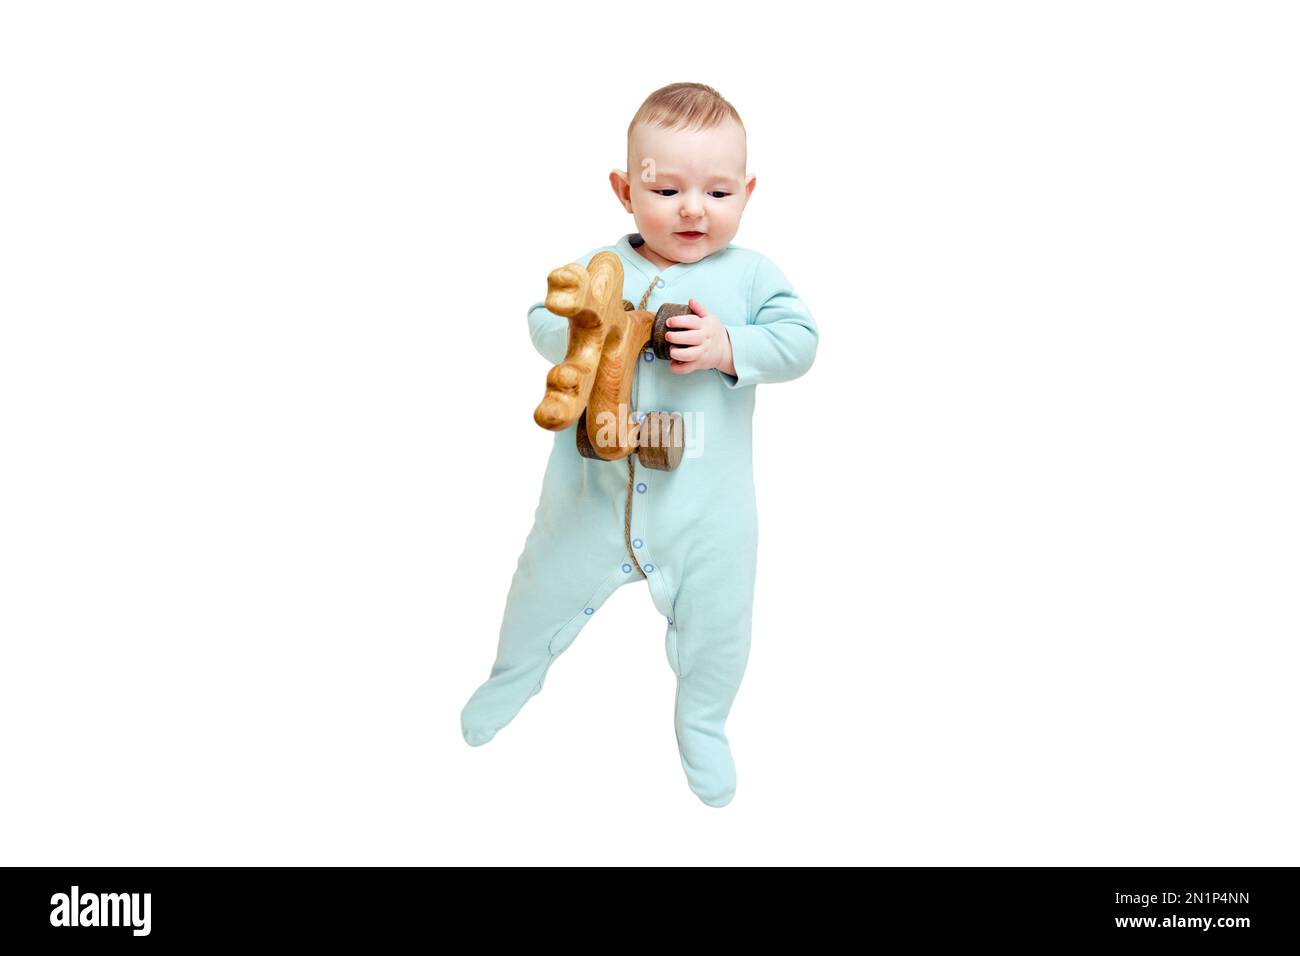 Happy baby lies in mint color clothes with wooden toys, isolated on a white background. Smiling child in turquoise pajamas, top view. Kid aged six mon Stock Photo